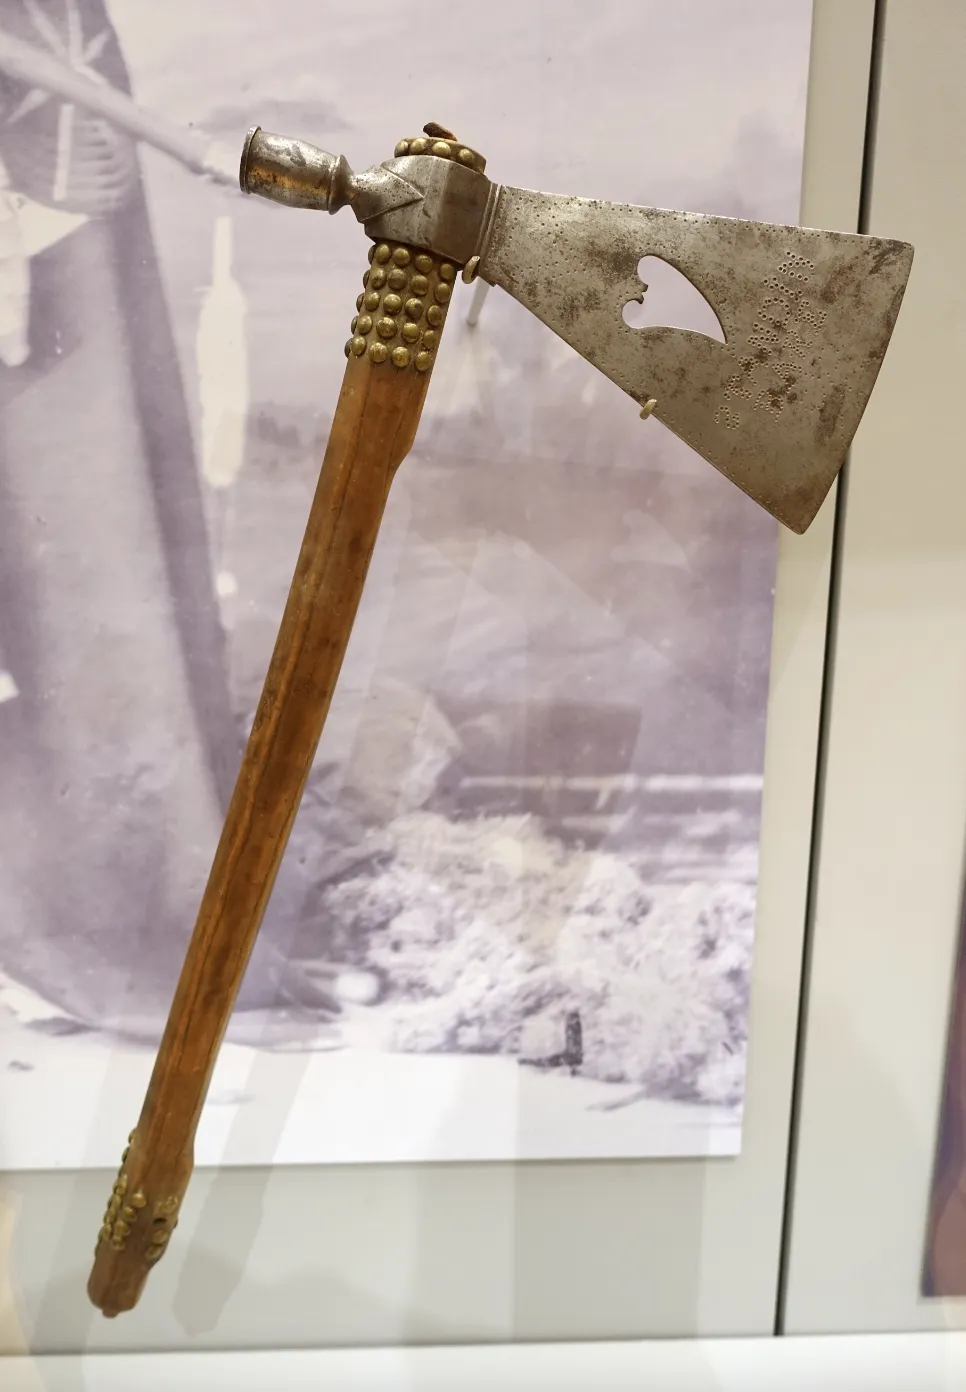 The pipe tomahawk, as seen on view at the Peabody Museum of Archaeology and Ethnology